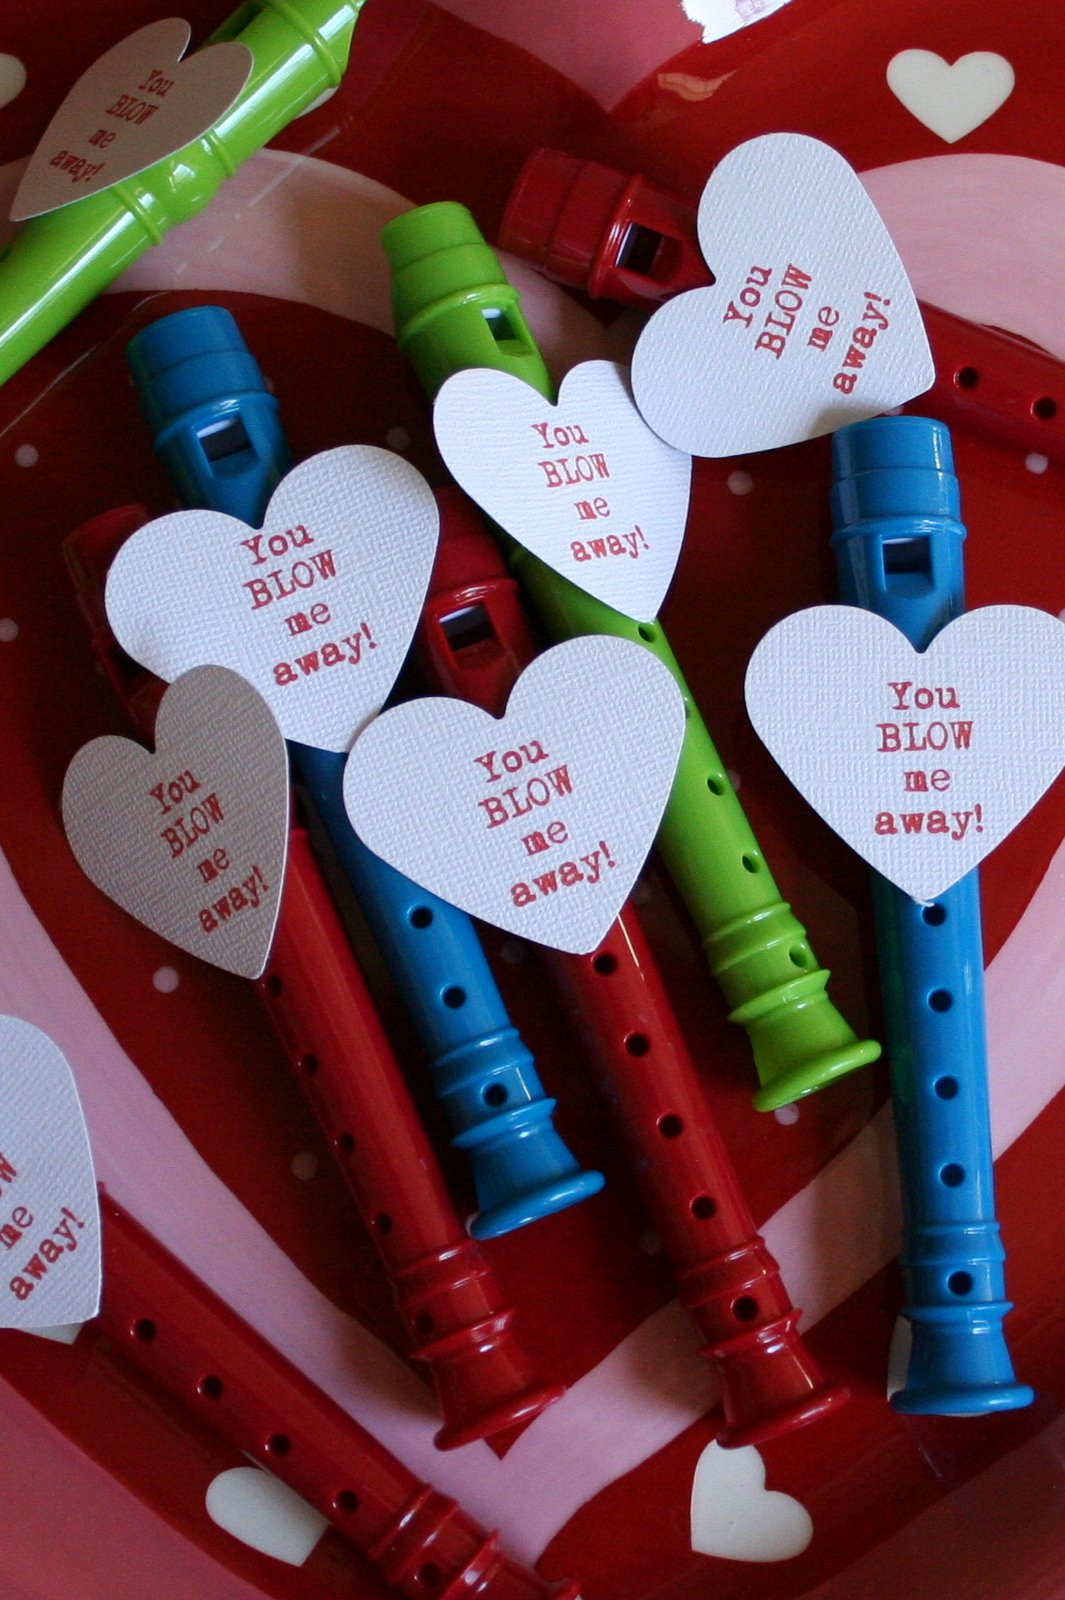 Toddler Valentine Gift Ideas
 Blow Me Away Whistle Valentine Dukes and Duchesses